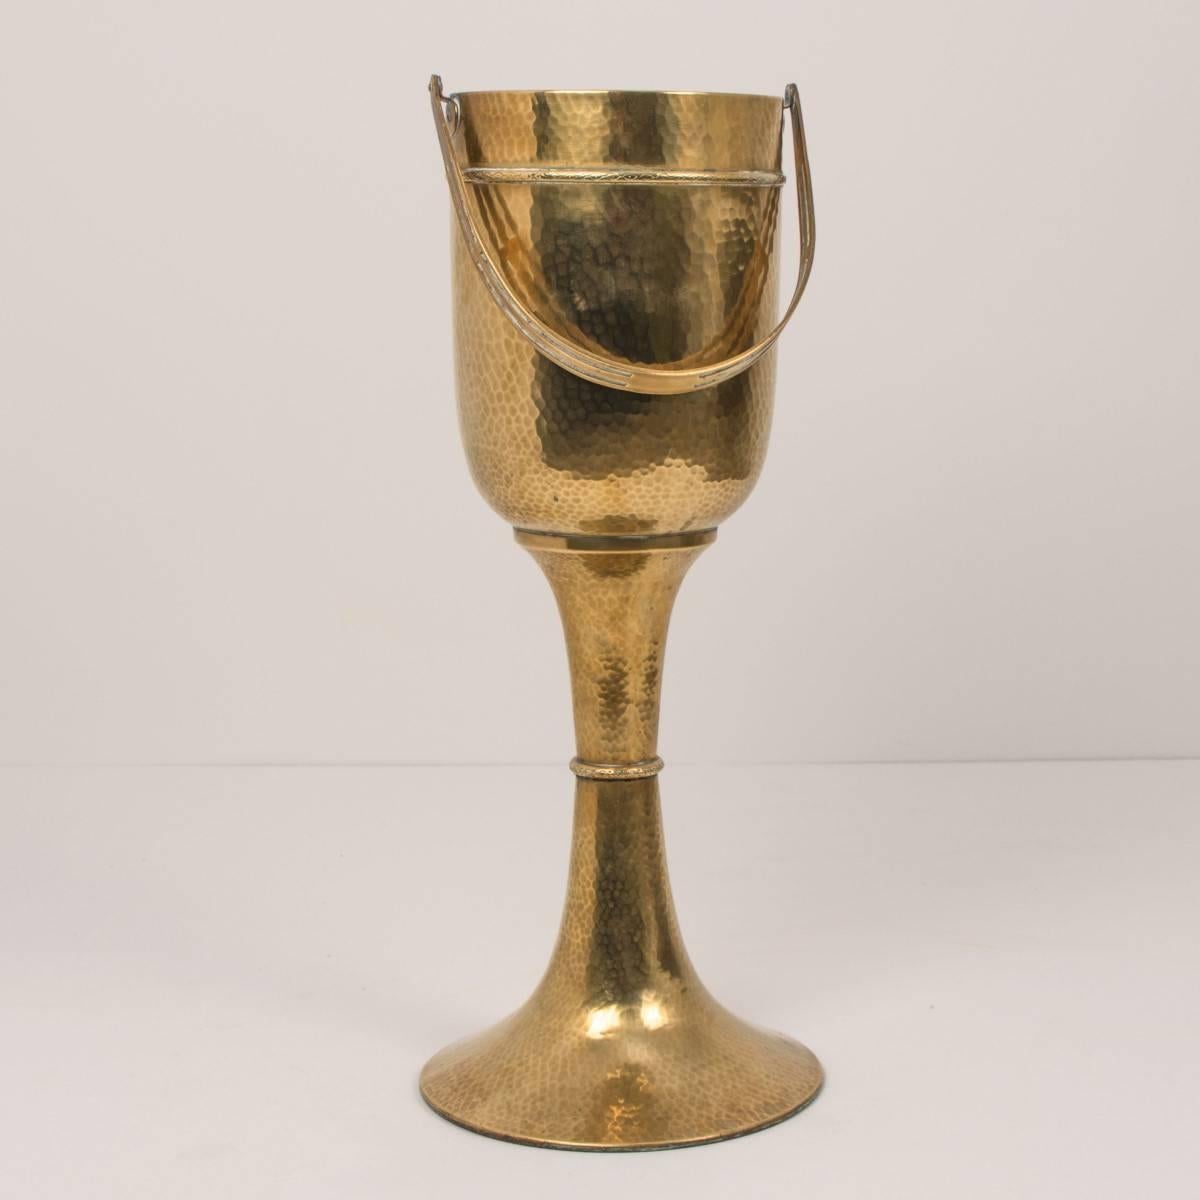 Fantastic heavy solid brass champagne cooler/ wine bottle holder with handle. Jugendstil by WMF. Polished and stove enameled
(The wine bottle is only decoration for the photo shooting, they is not included).
 